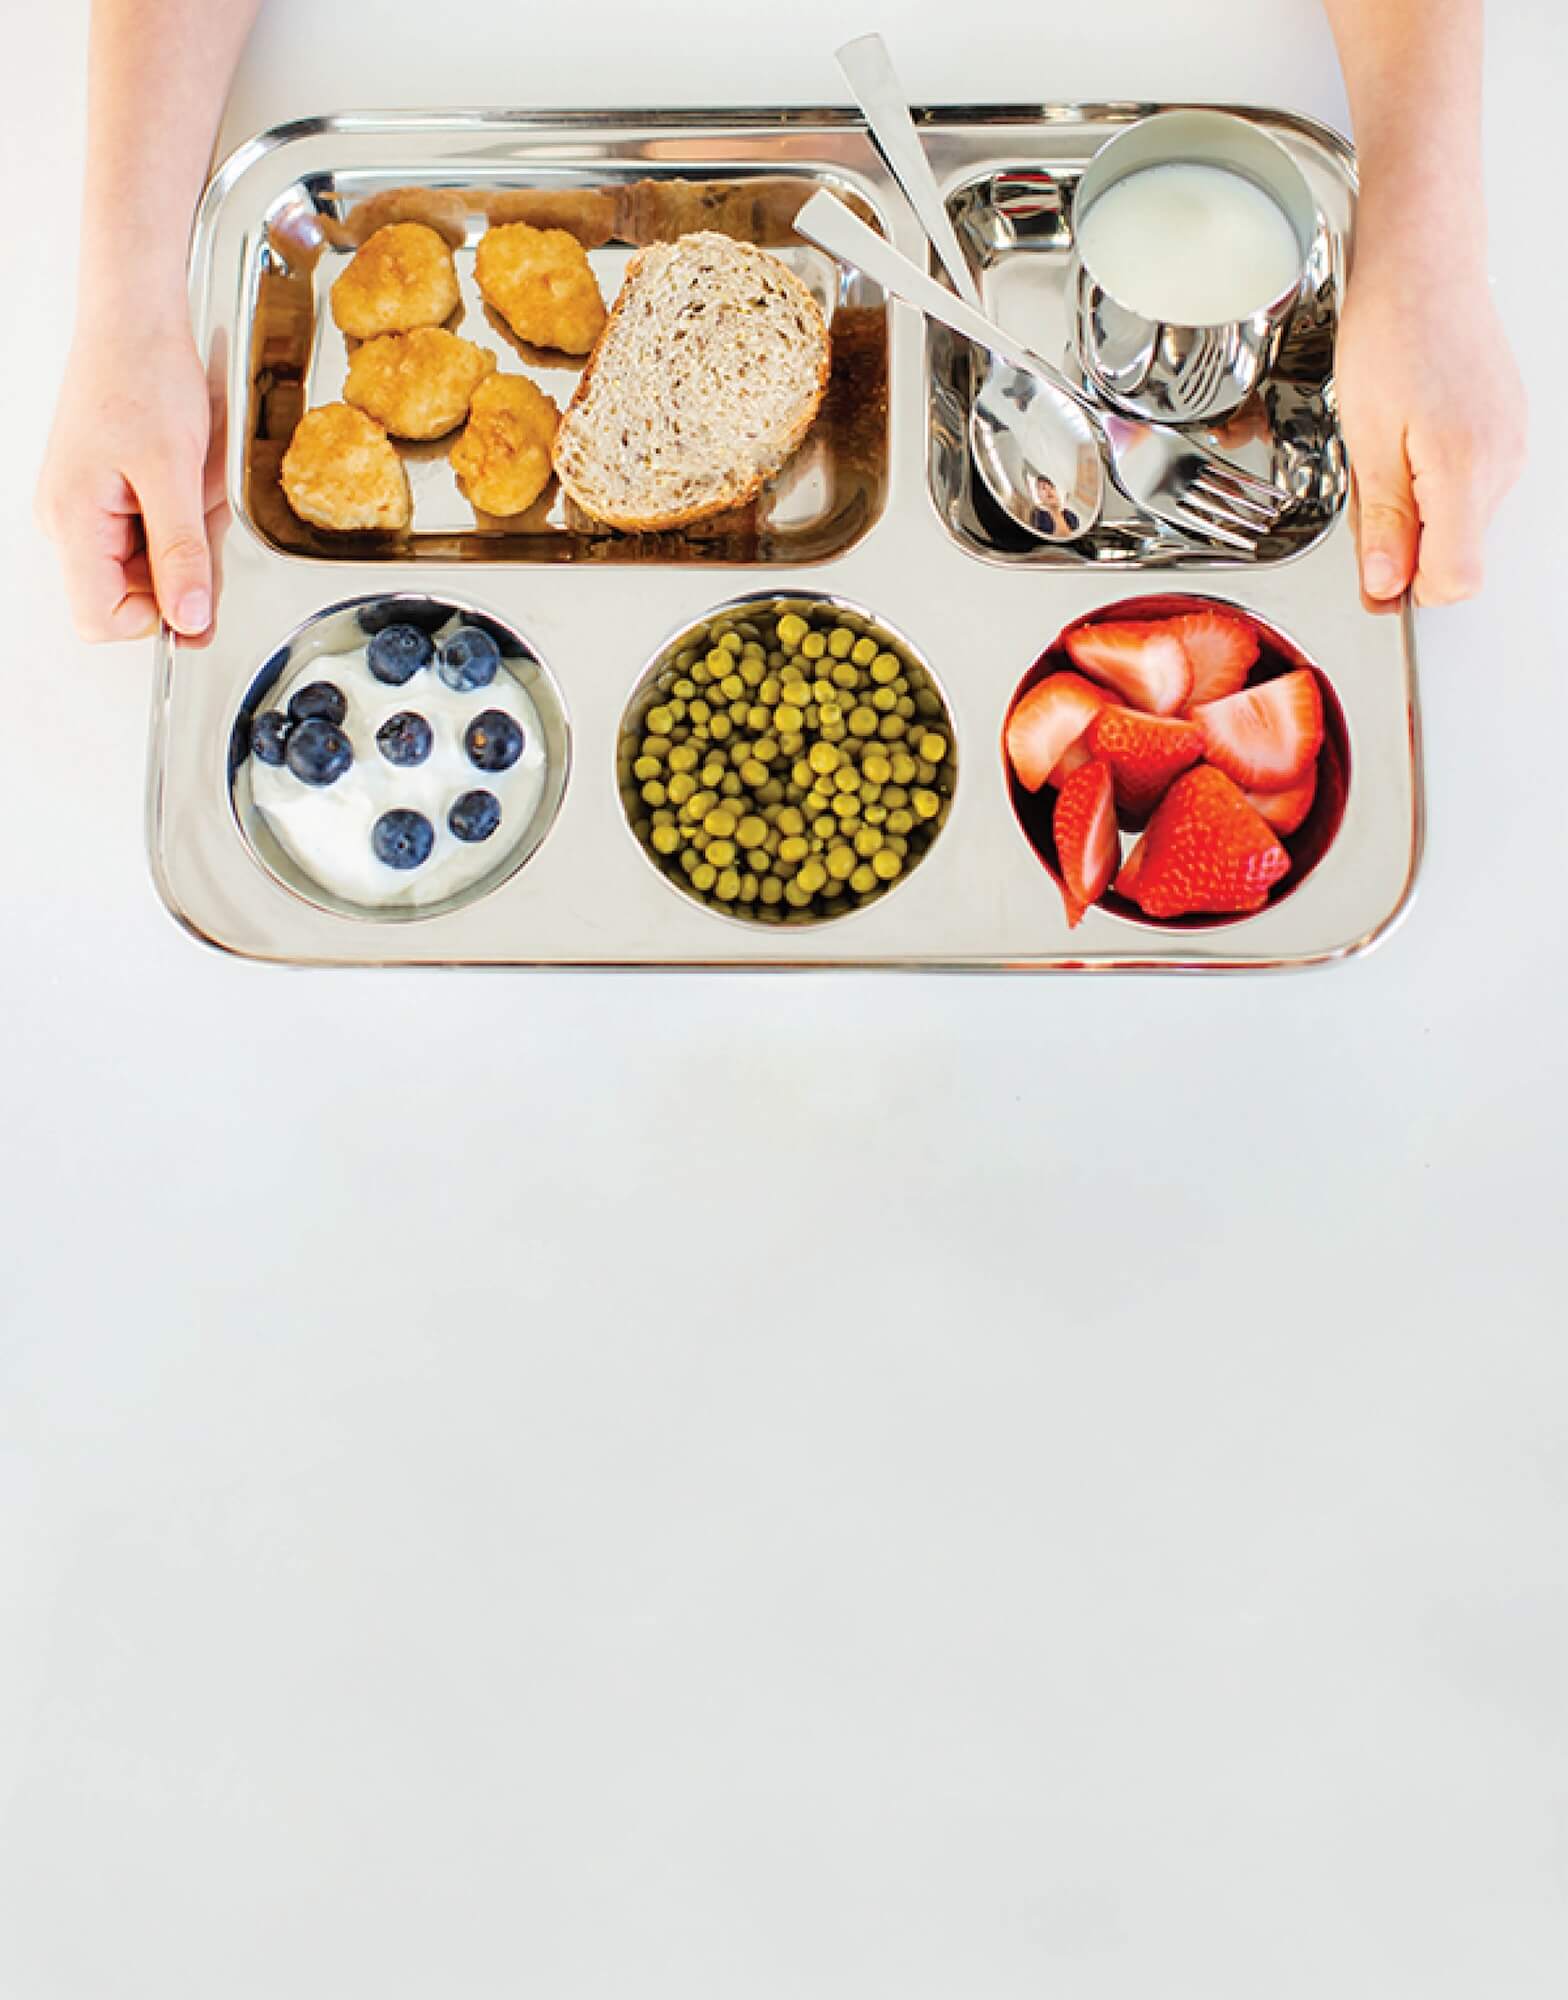 stainless steel cafeteria tray